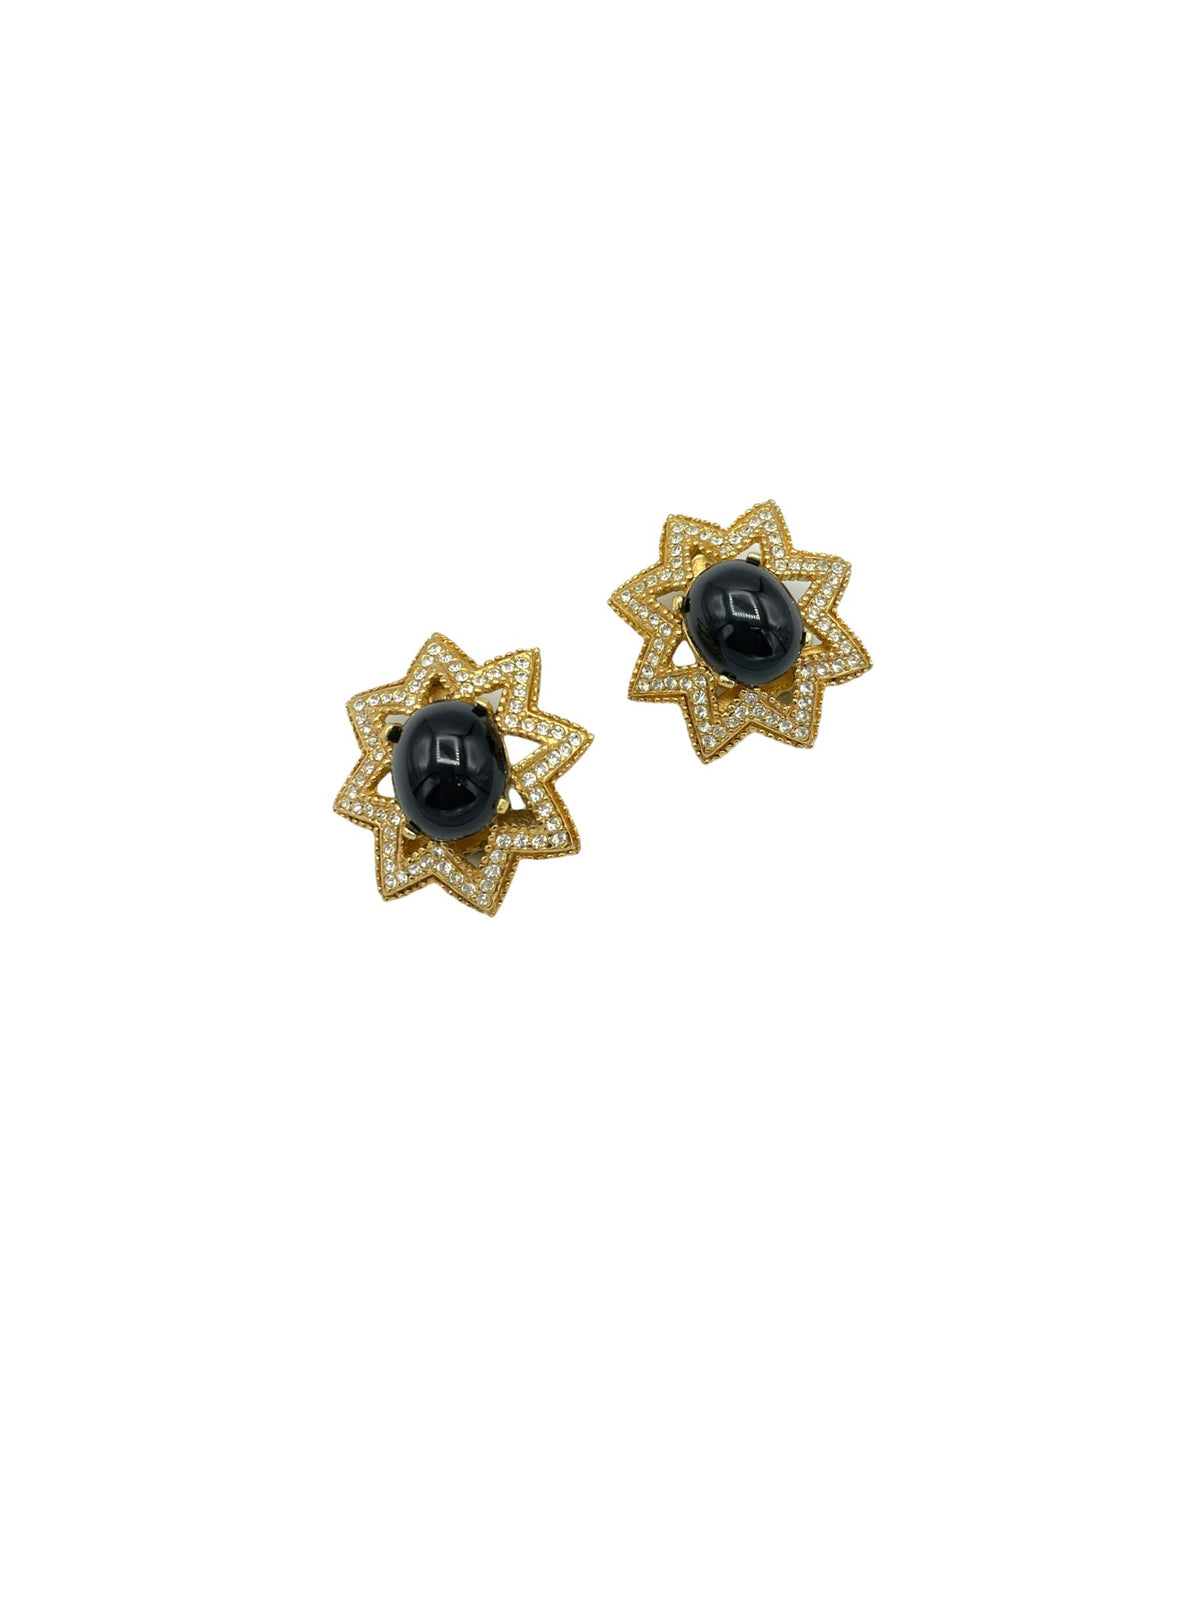 Ciner Gold Black Cabochon Rhinestone Vintage Statement Clip-On Earrings - 24 Wishes Vintage Jewelry